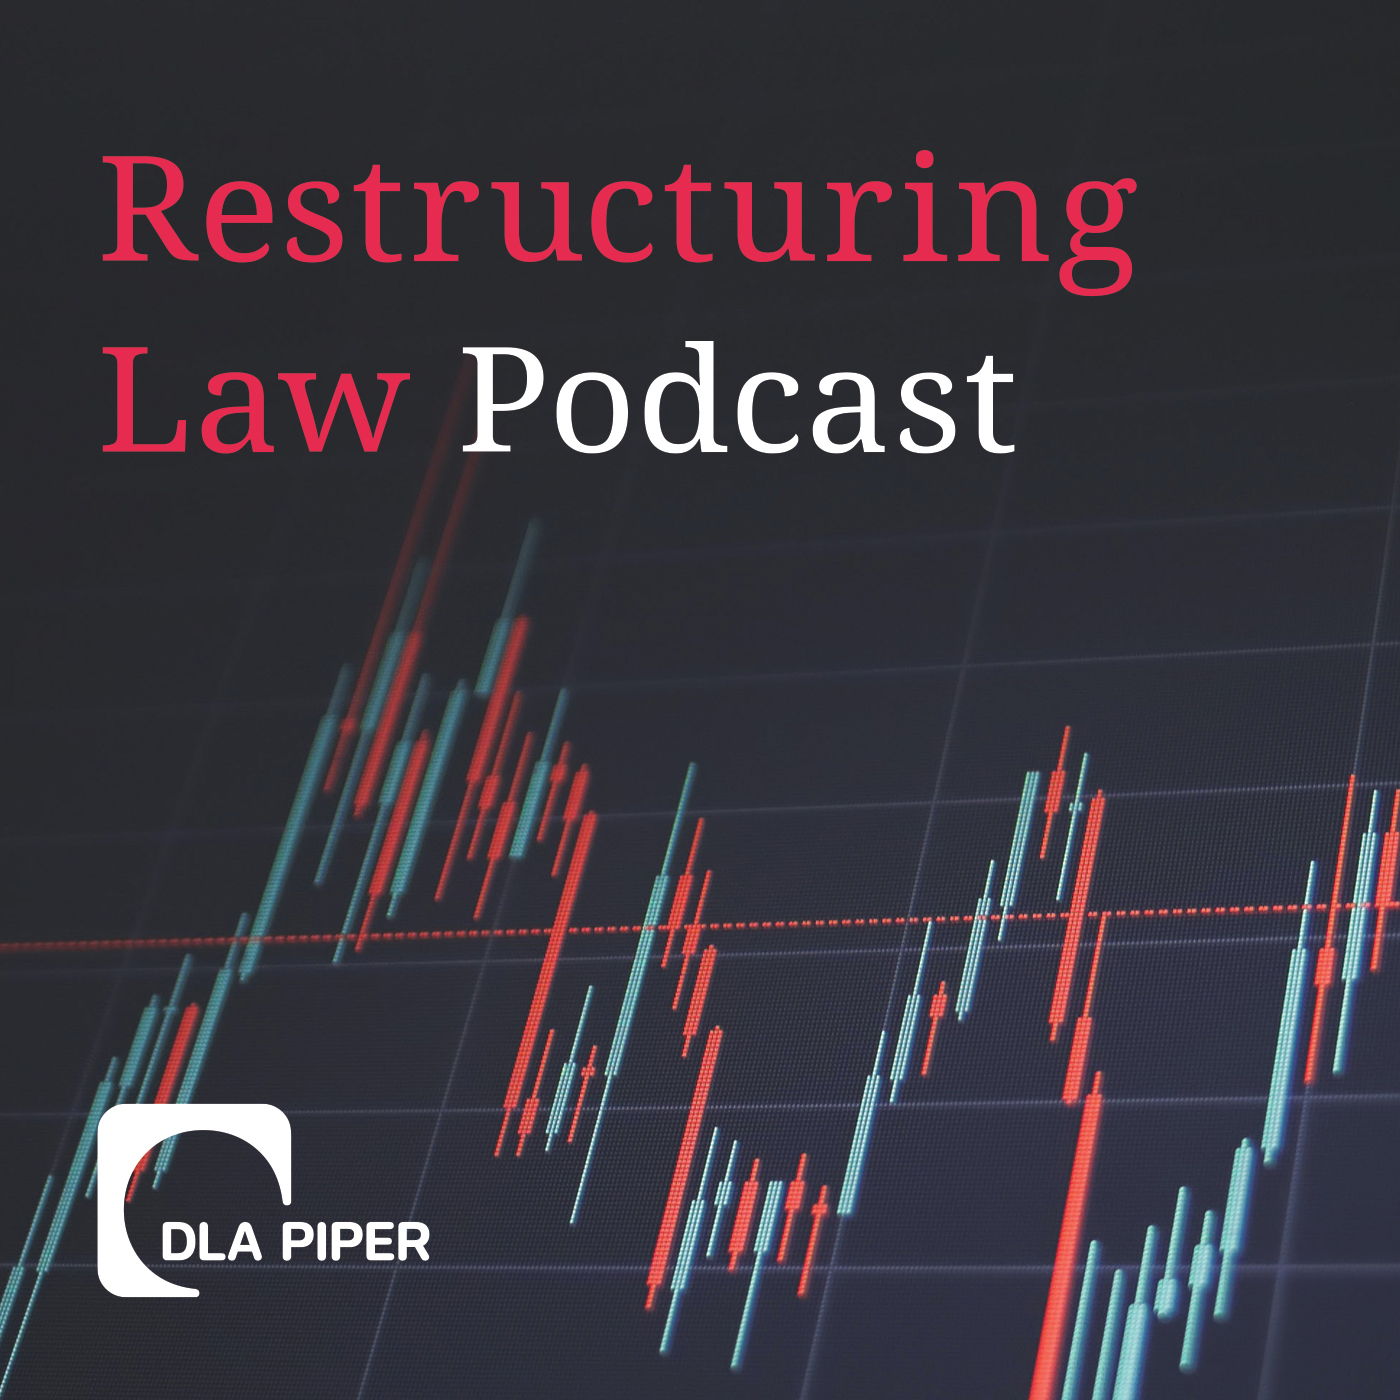 The DLA Piper Restructuring Law Podcast